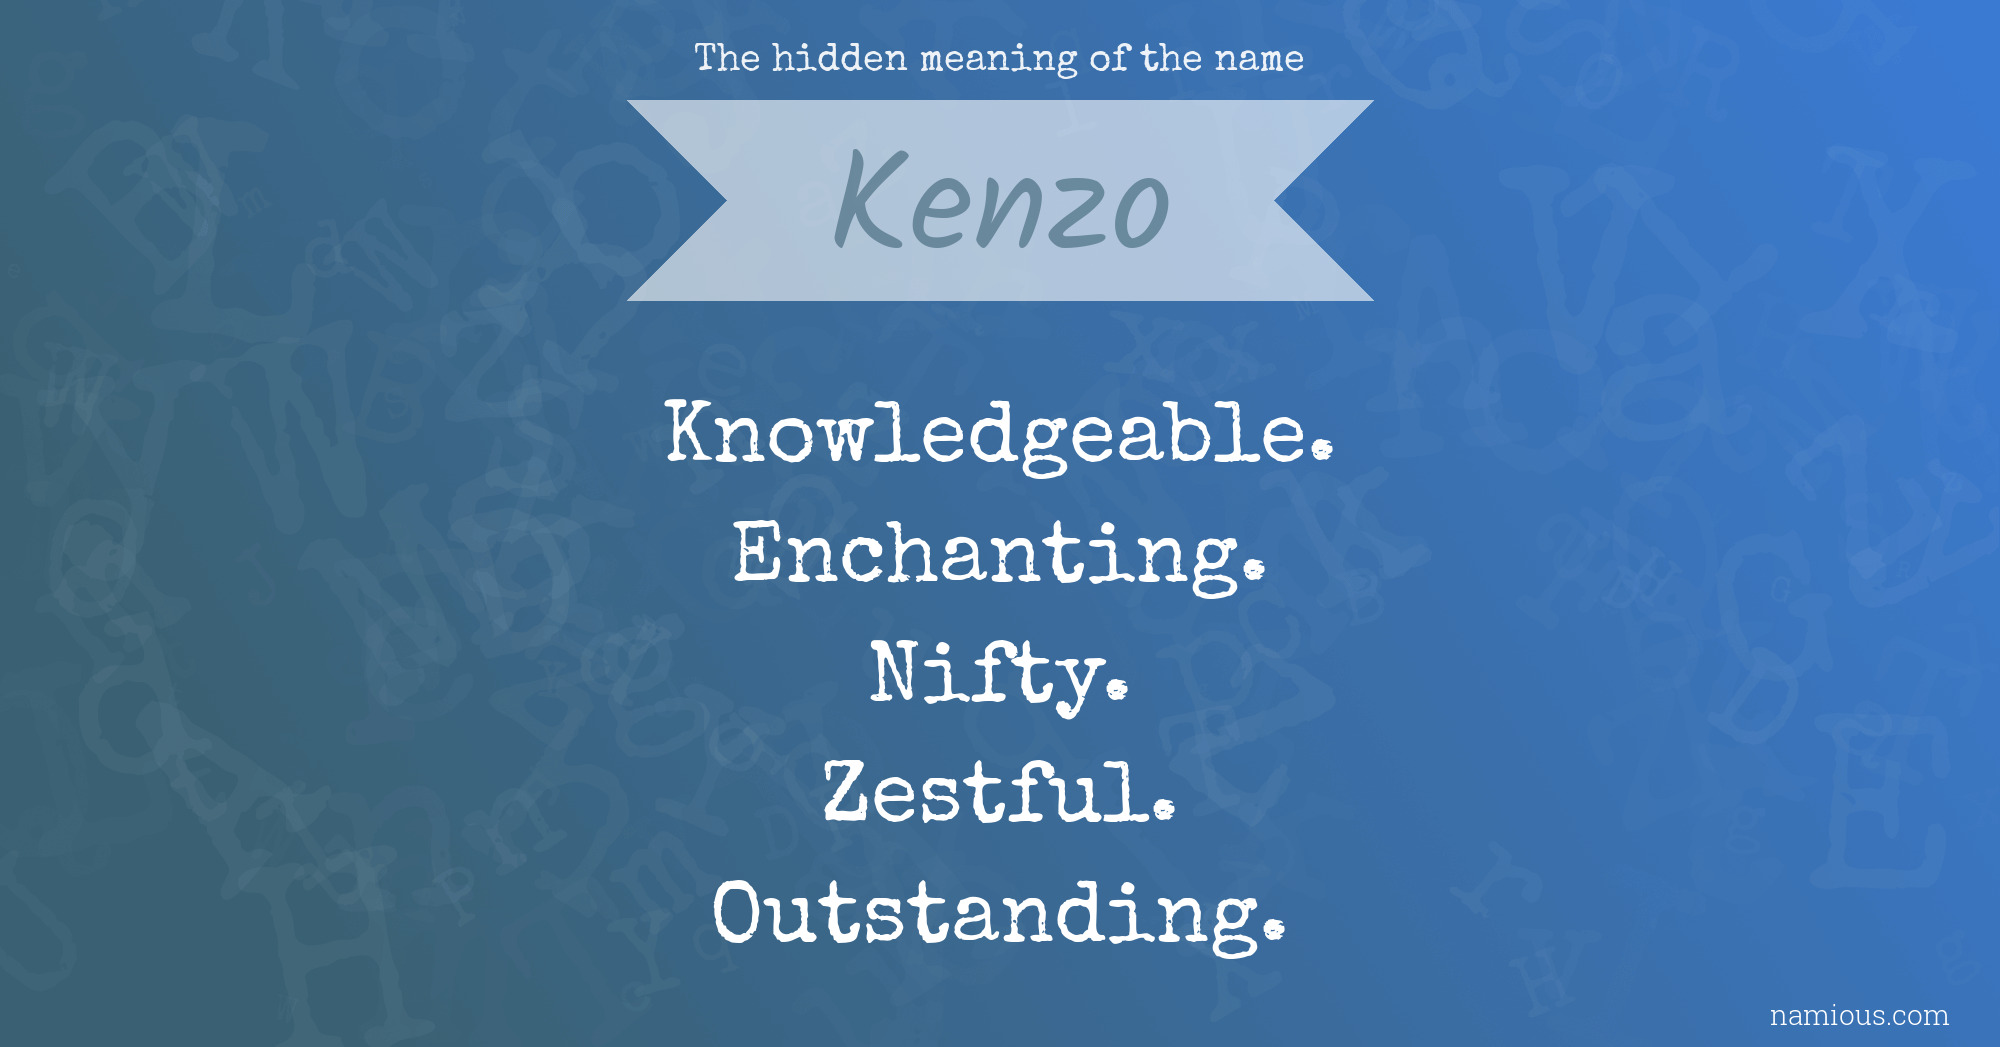 kenzo name meaning